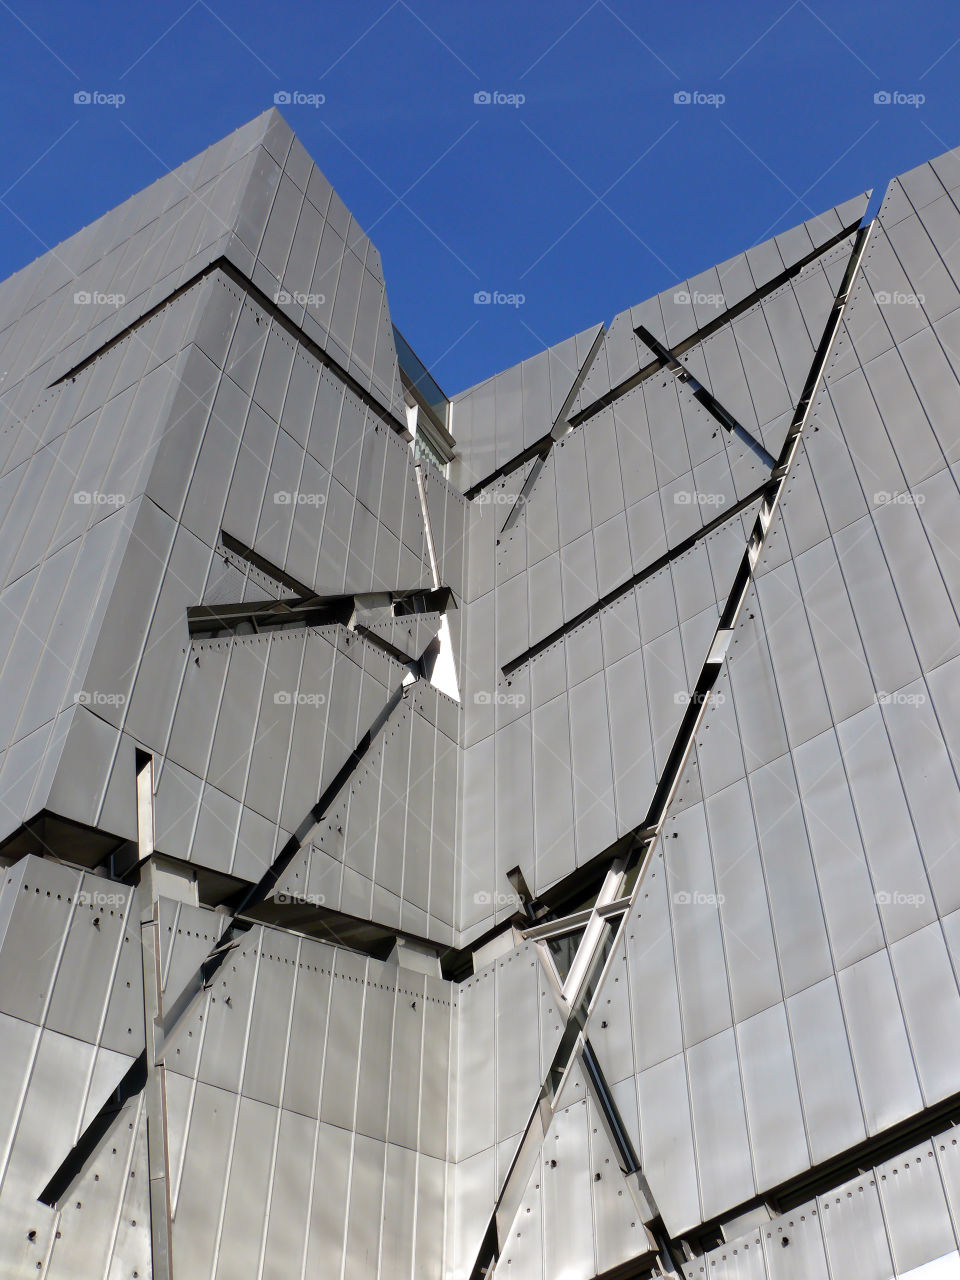 Low angle view of built structure of the Jewish Museum Berlin against clear sky.